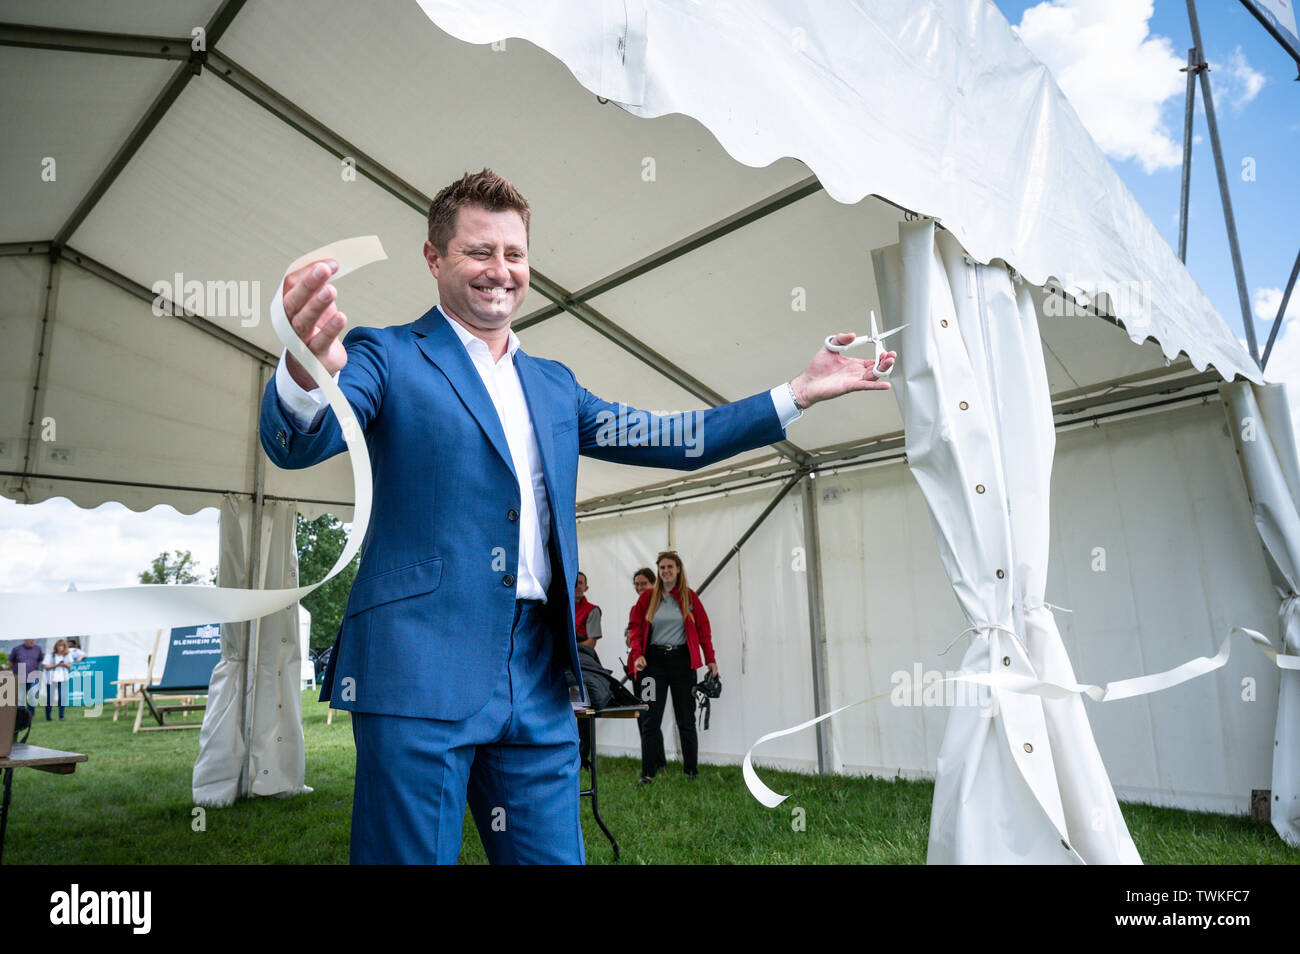 Blenheim Palace, Oxfordshire, UK. Friday 21st June 2019. Architect and television personality George Clarke opens The Blenheim Flower Show, which runs from 21st-23rd June. Andrew Walmsley/Alamy Live News Stock Photo